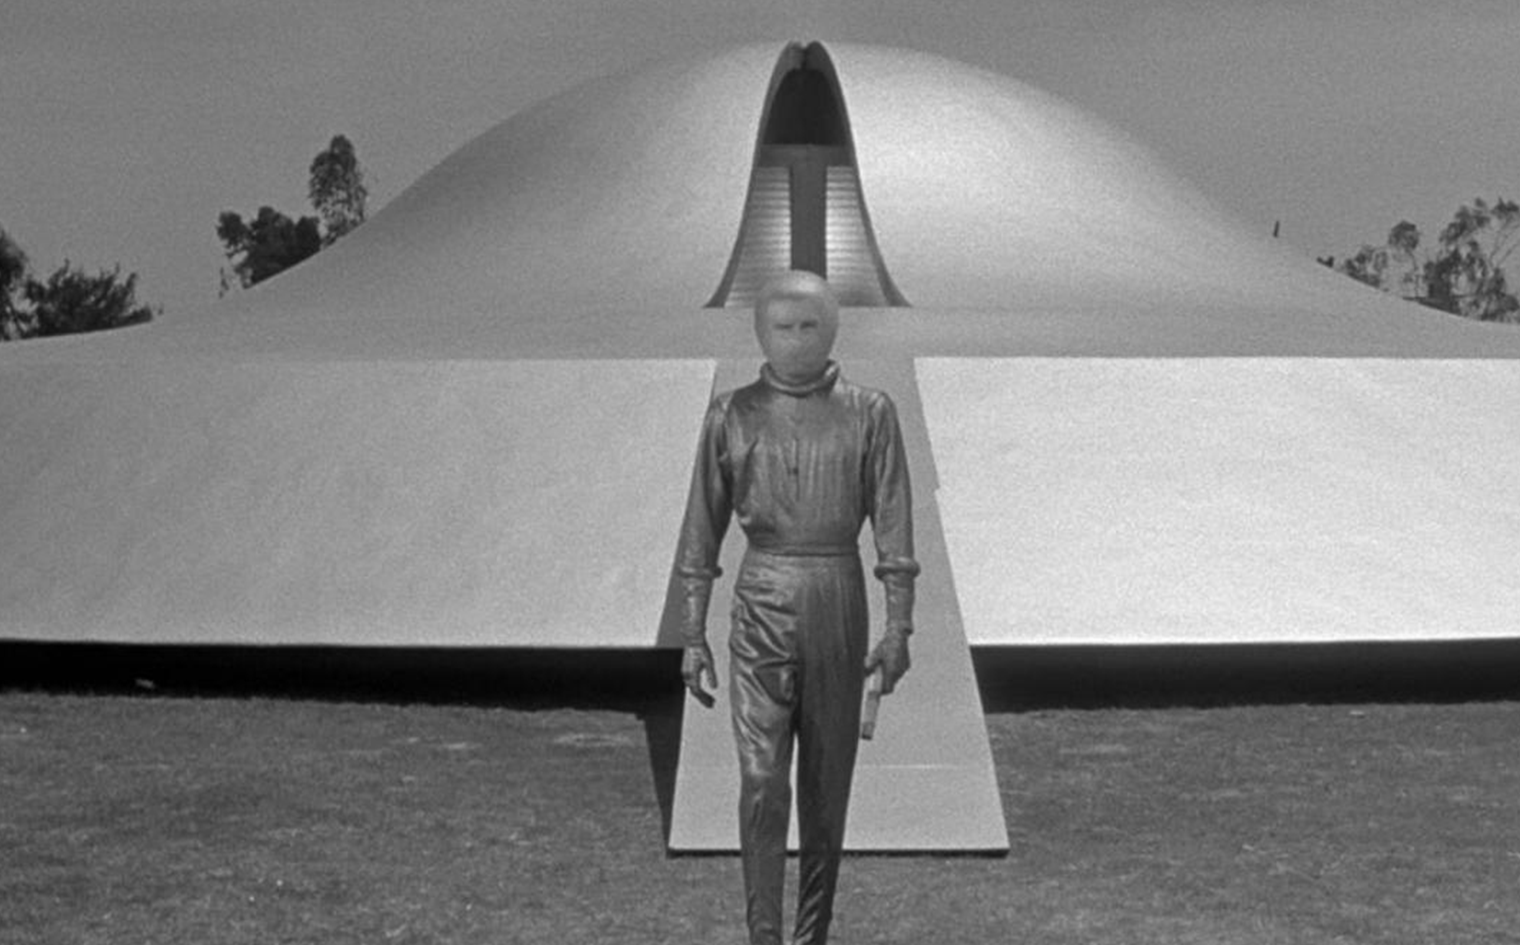 the day the earth stood still 1951 robot